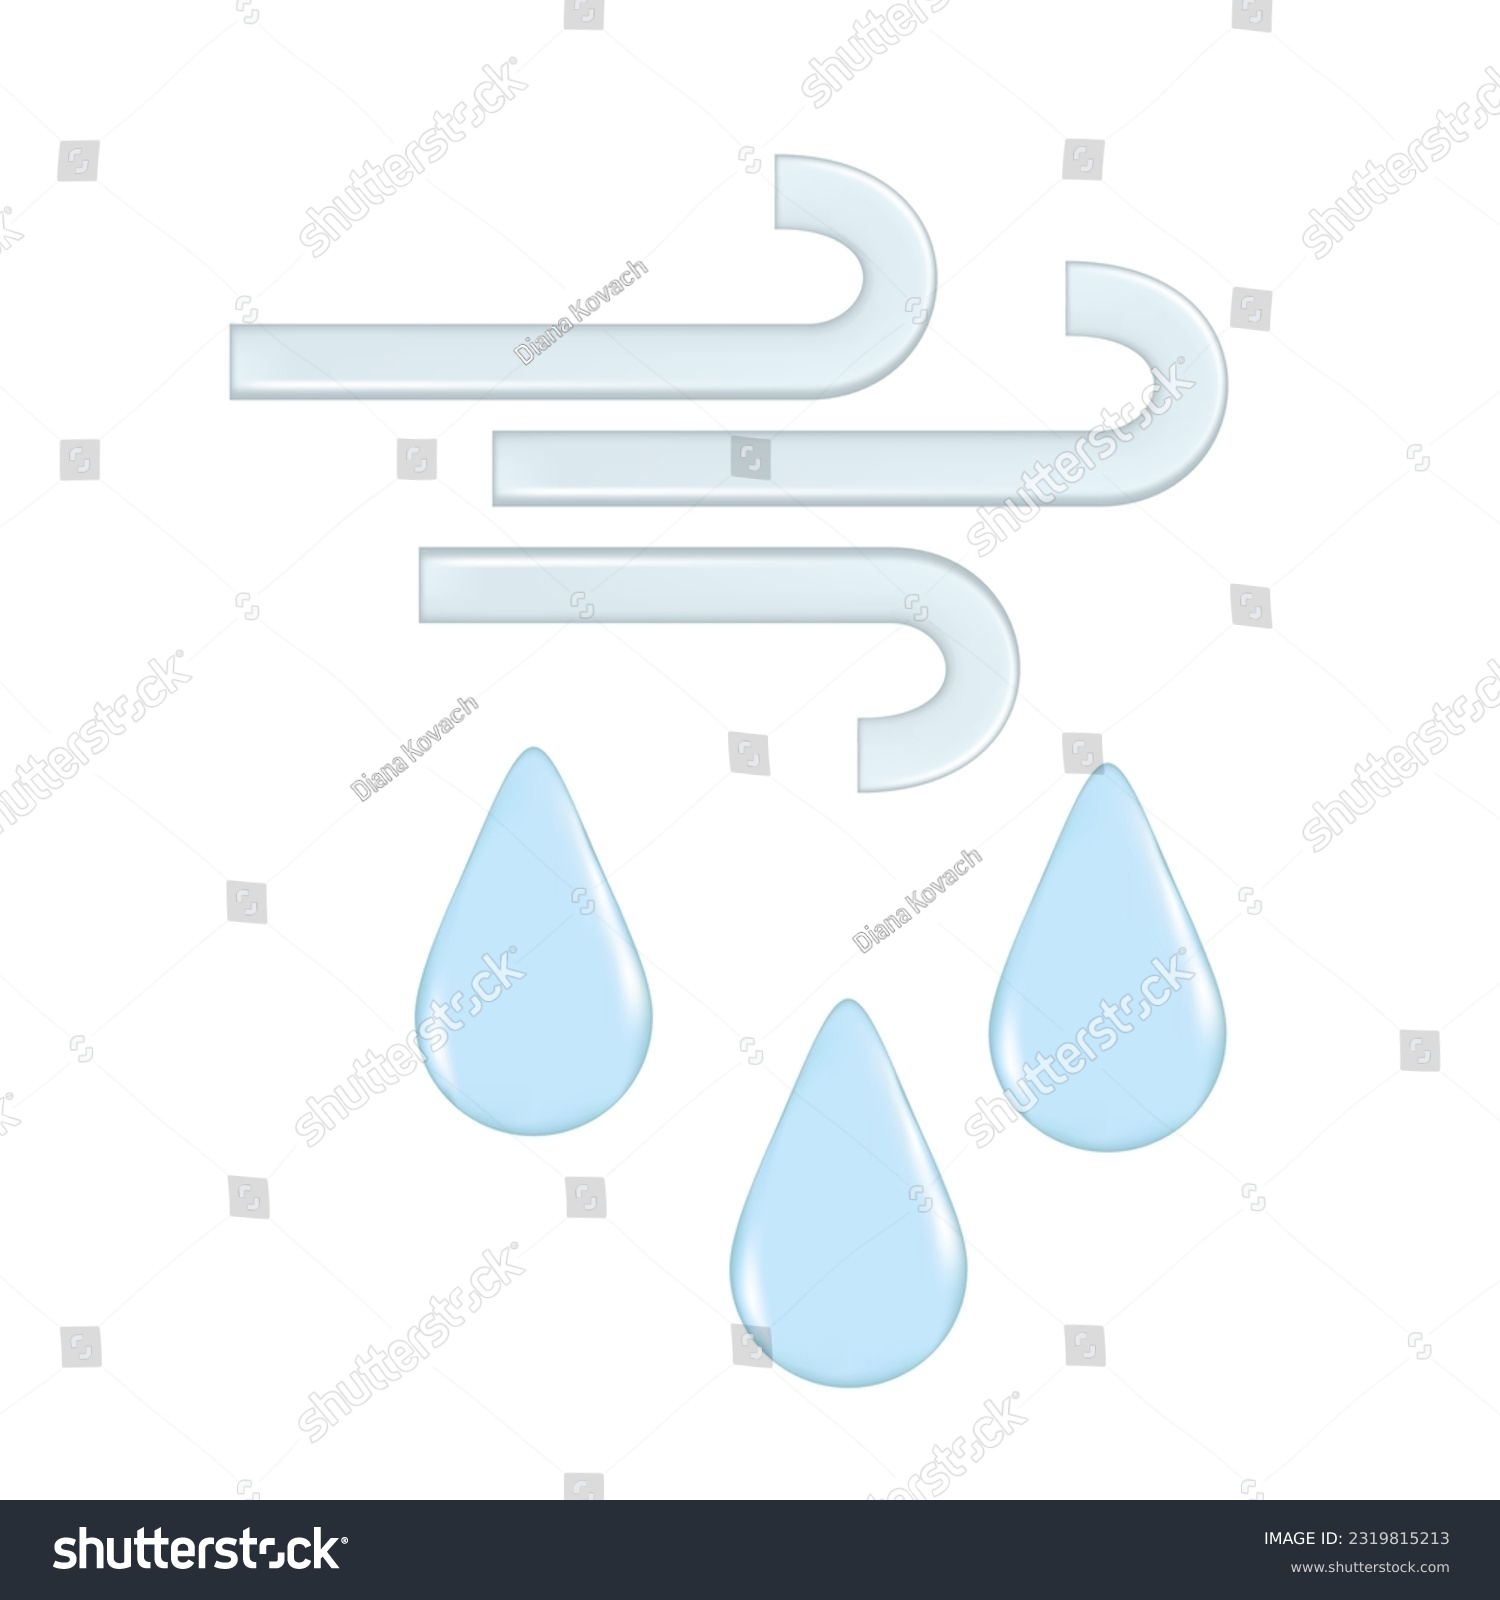 SVG of Realistic 3d design of weather forecast elements, icon symbol, meteorology. Decorative cute 3d blue rain and wind. Cartoon vector illustration isolated on a white background svg